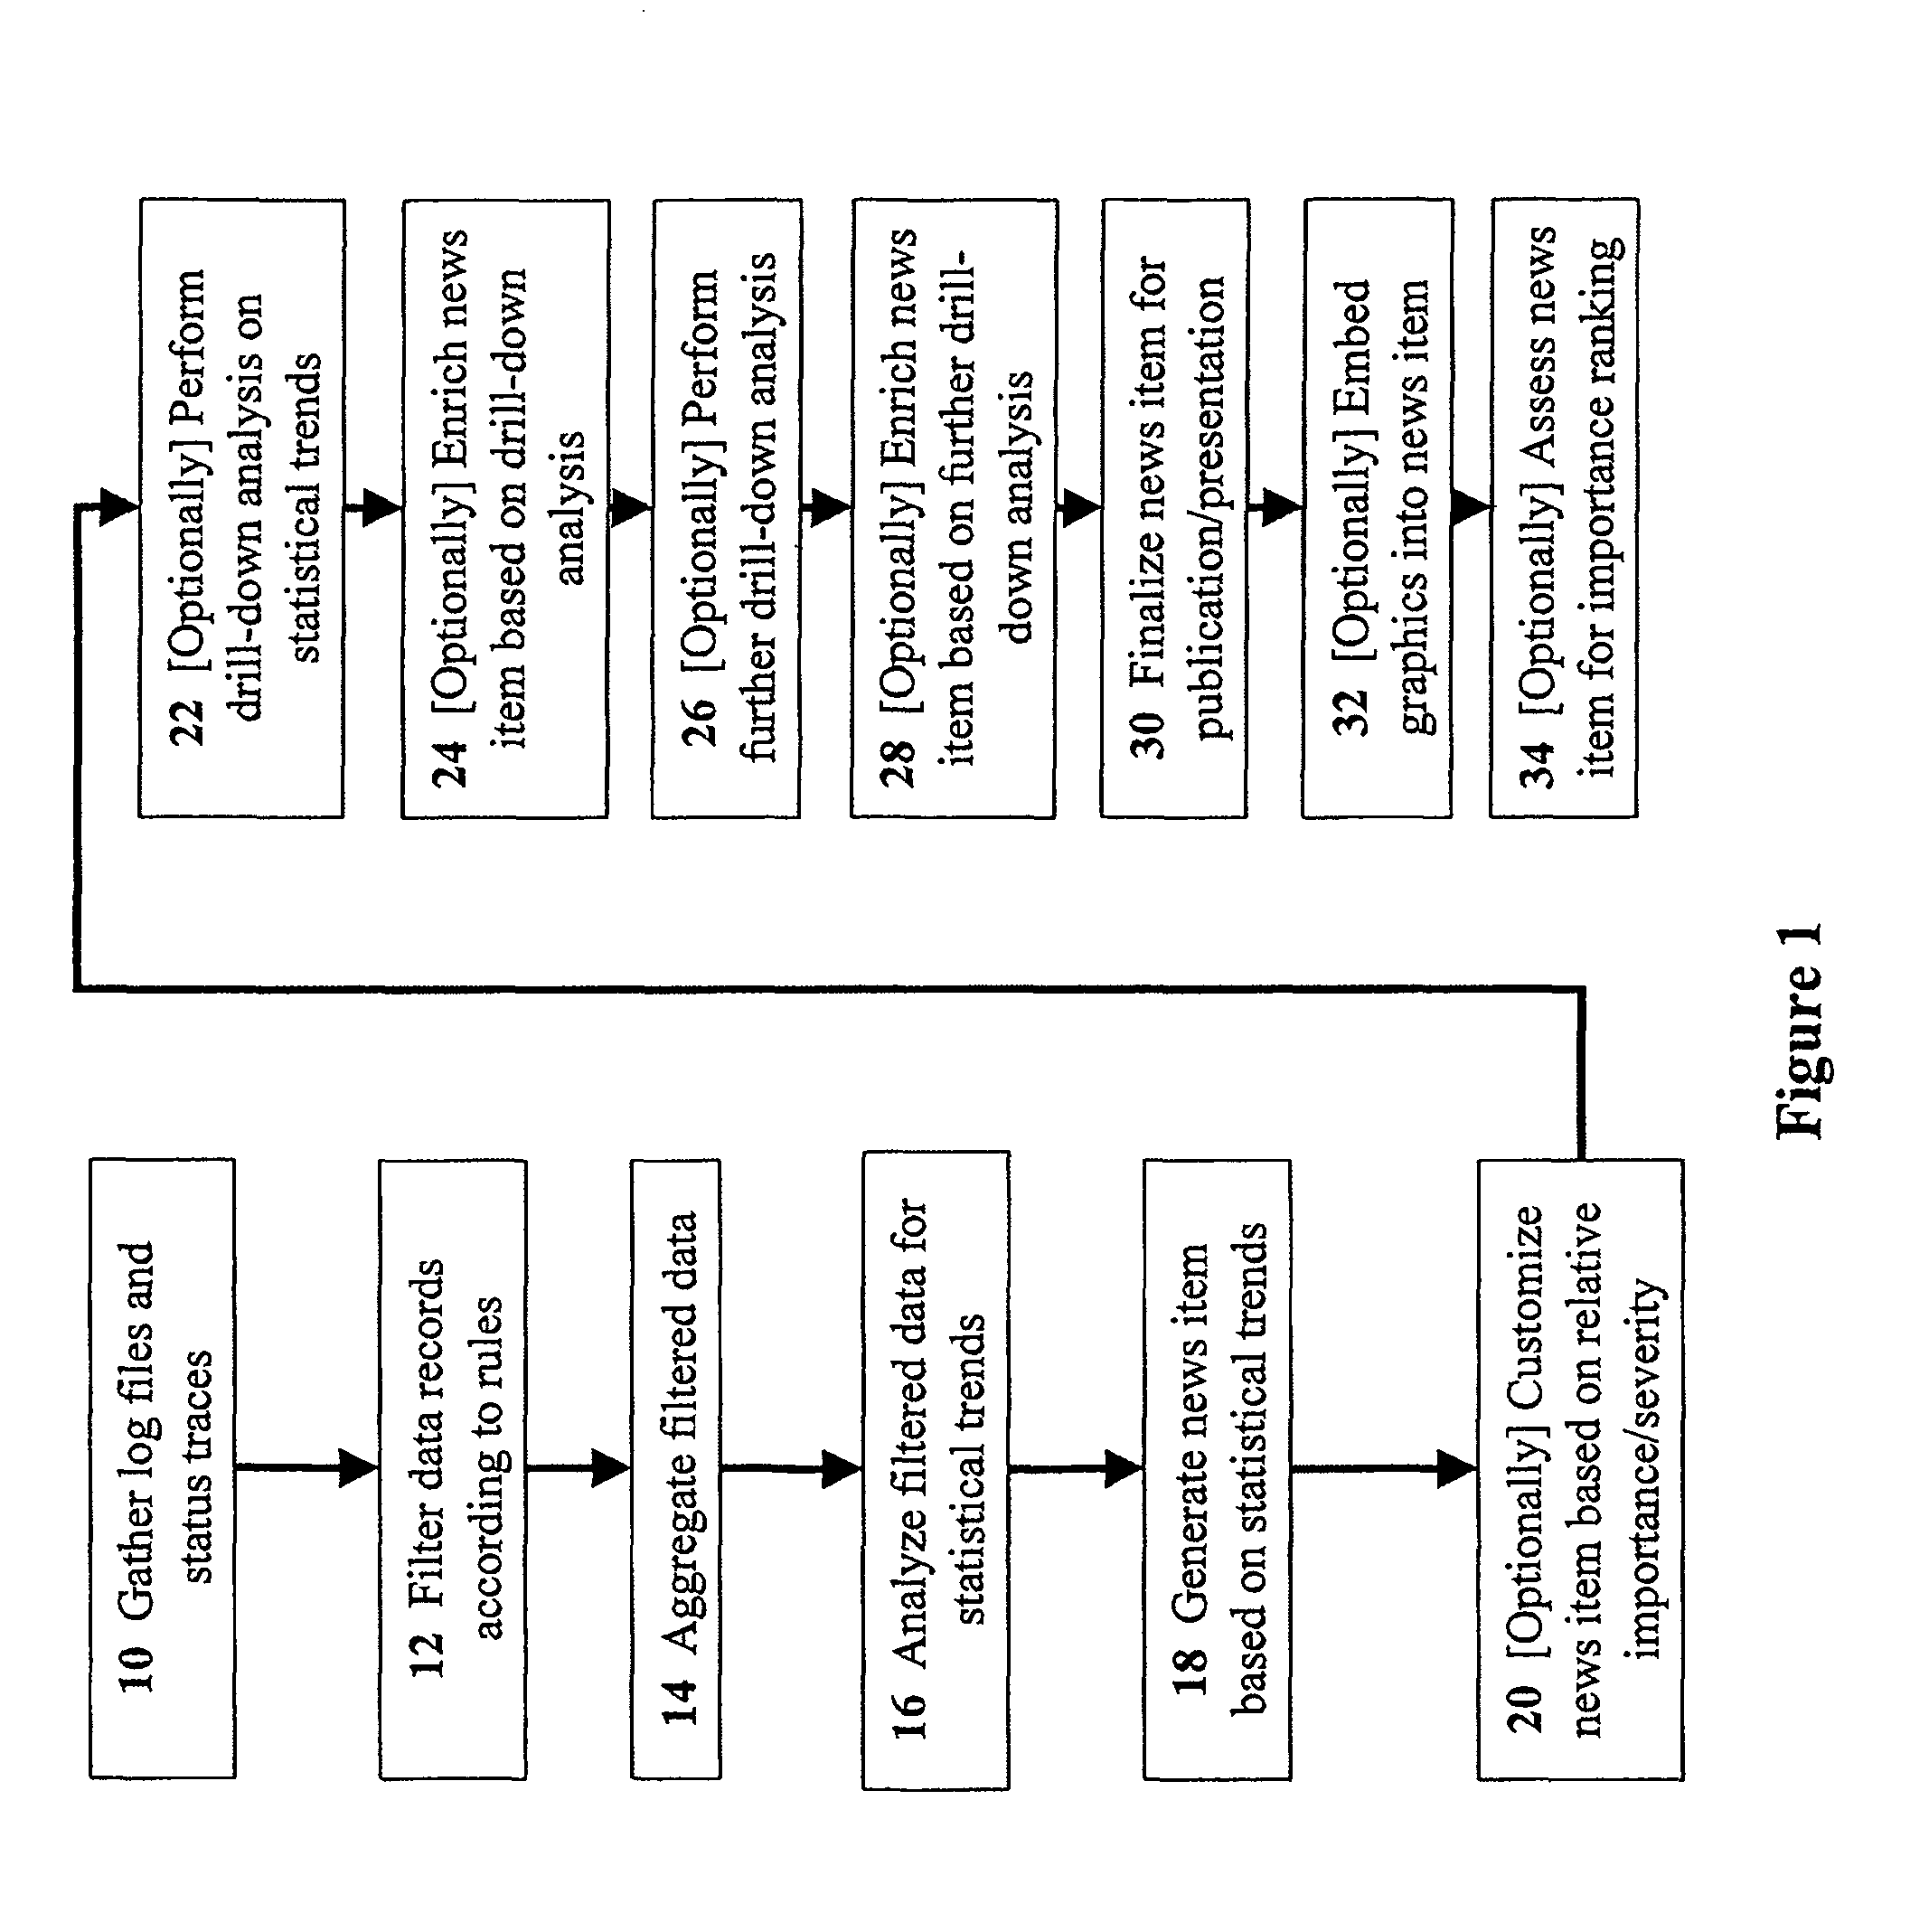 Methods for automatically generating natural-language news items from log files and status traces